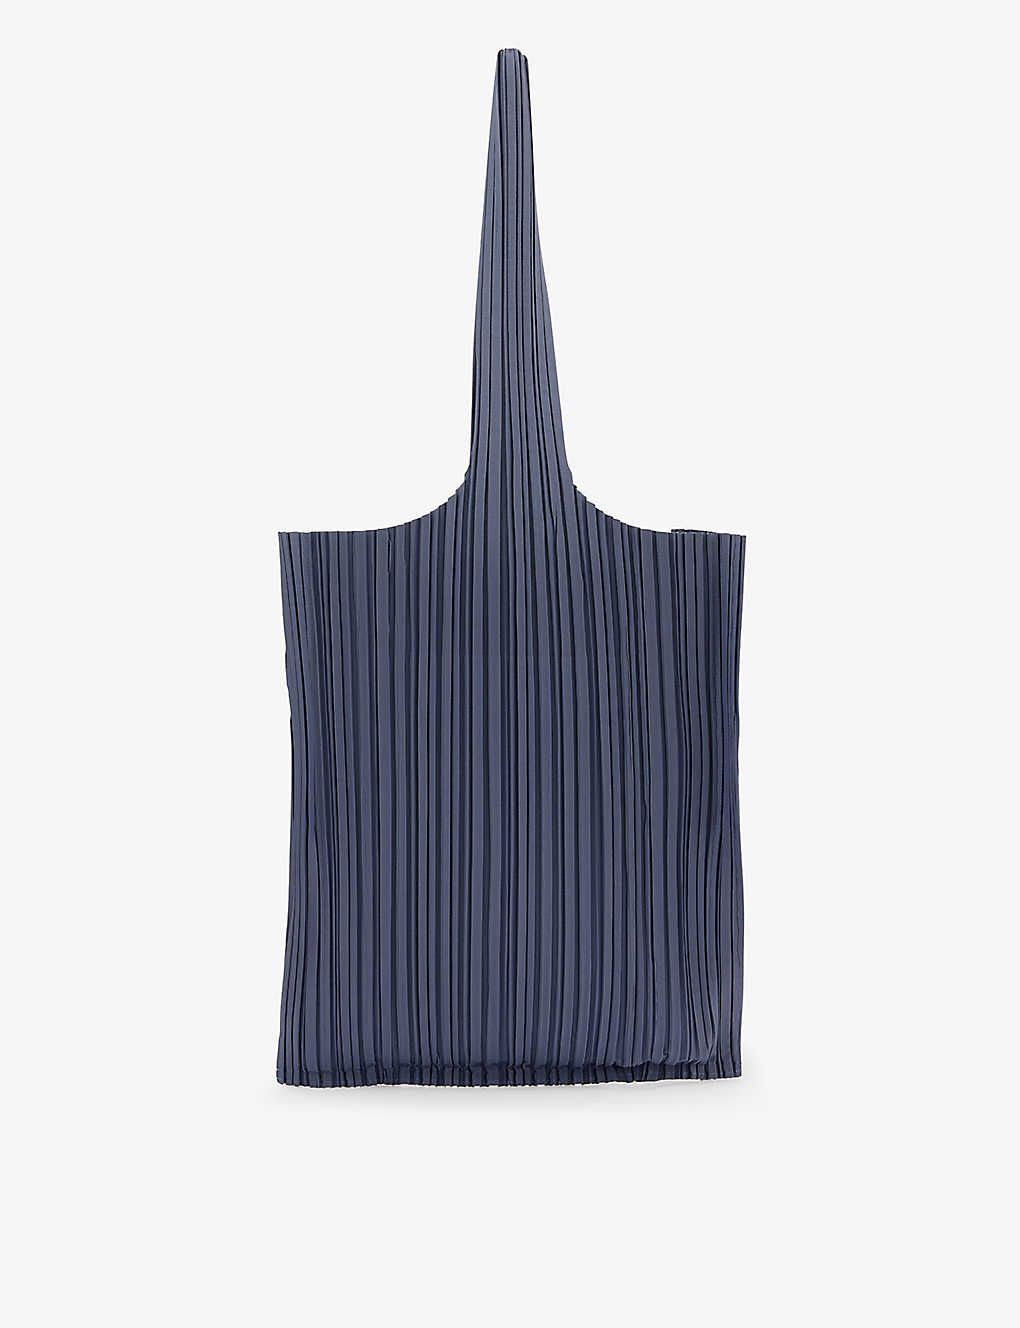 Pleats Please! by Issey Miyake on Behance